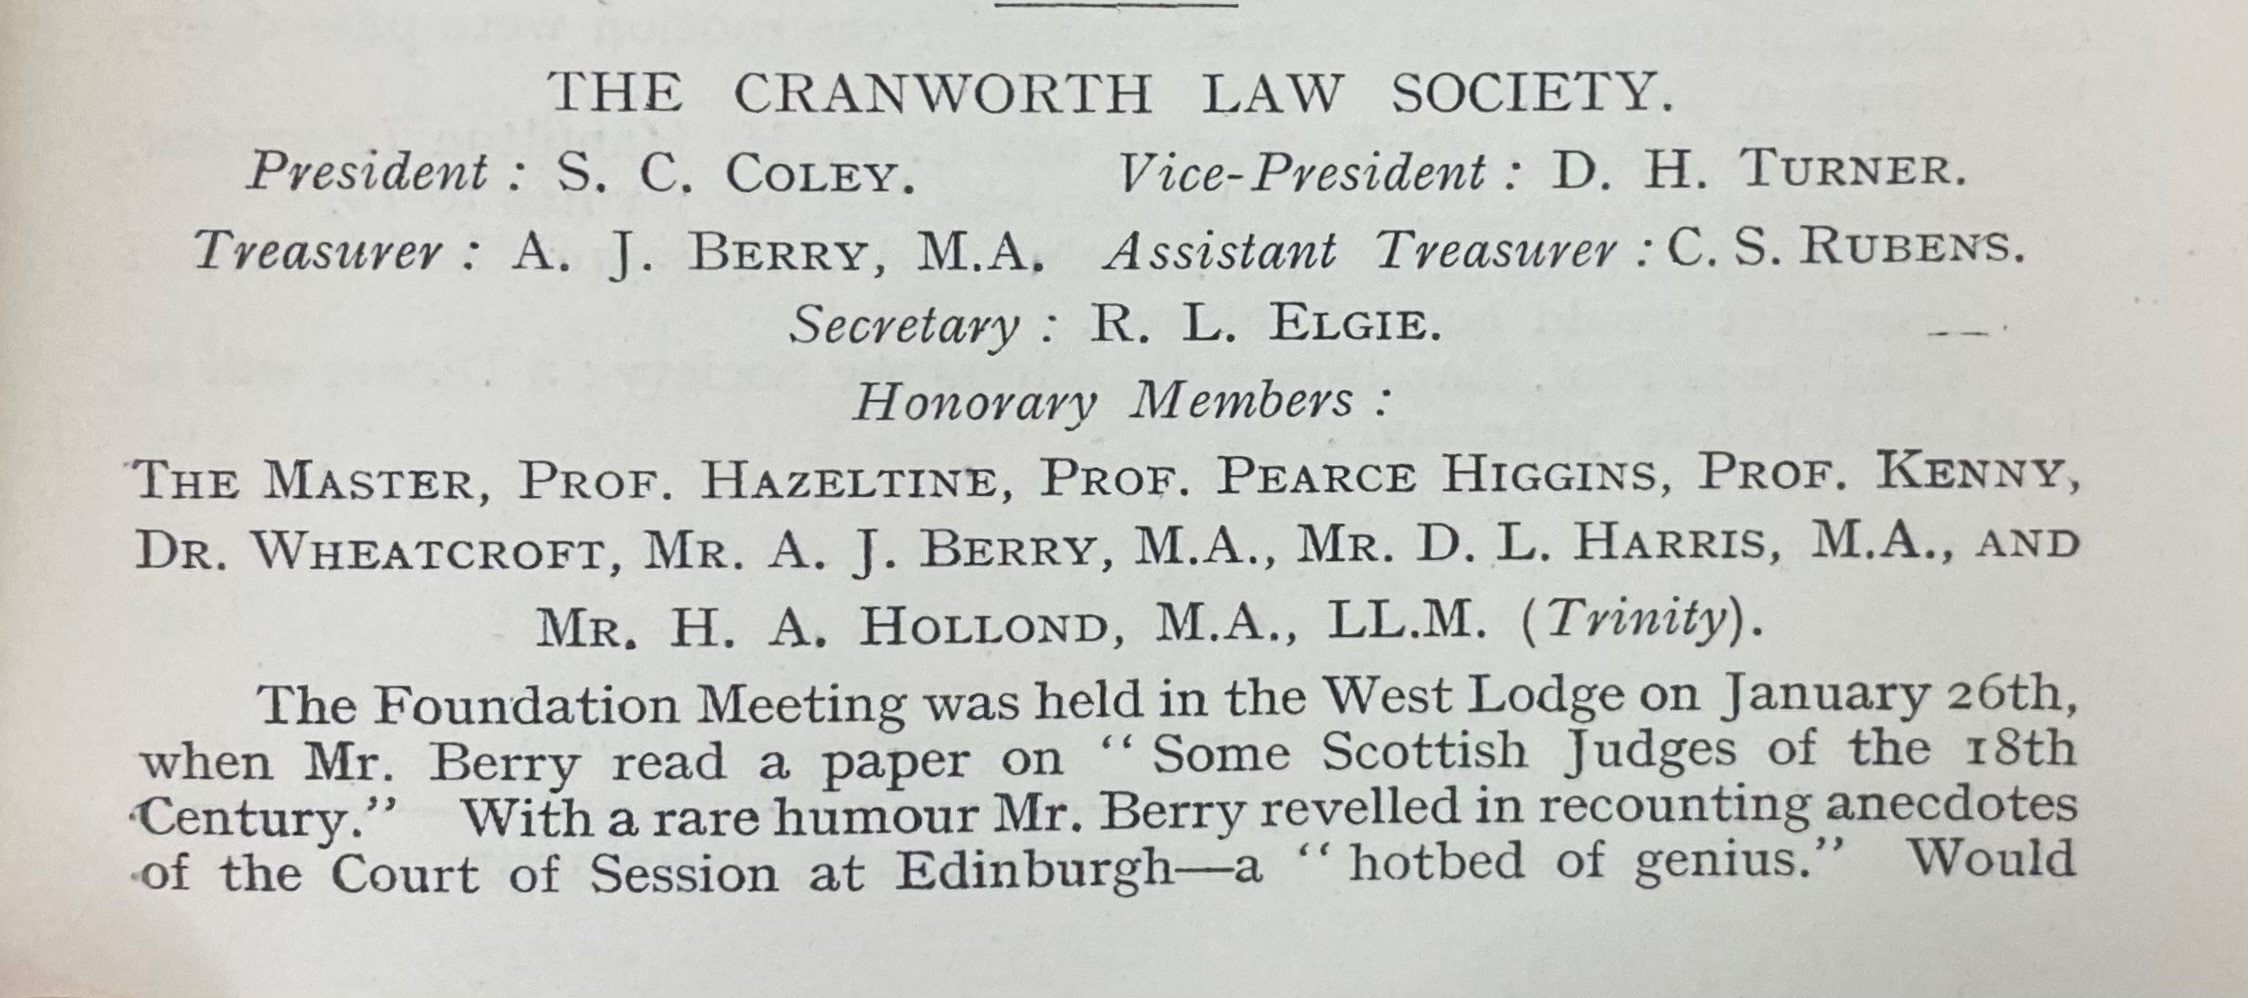 Extract from report on the Society's founding meeting